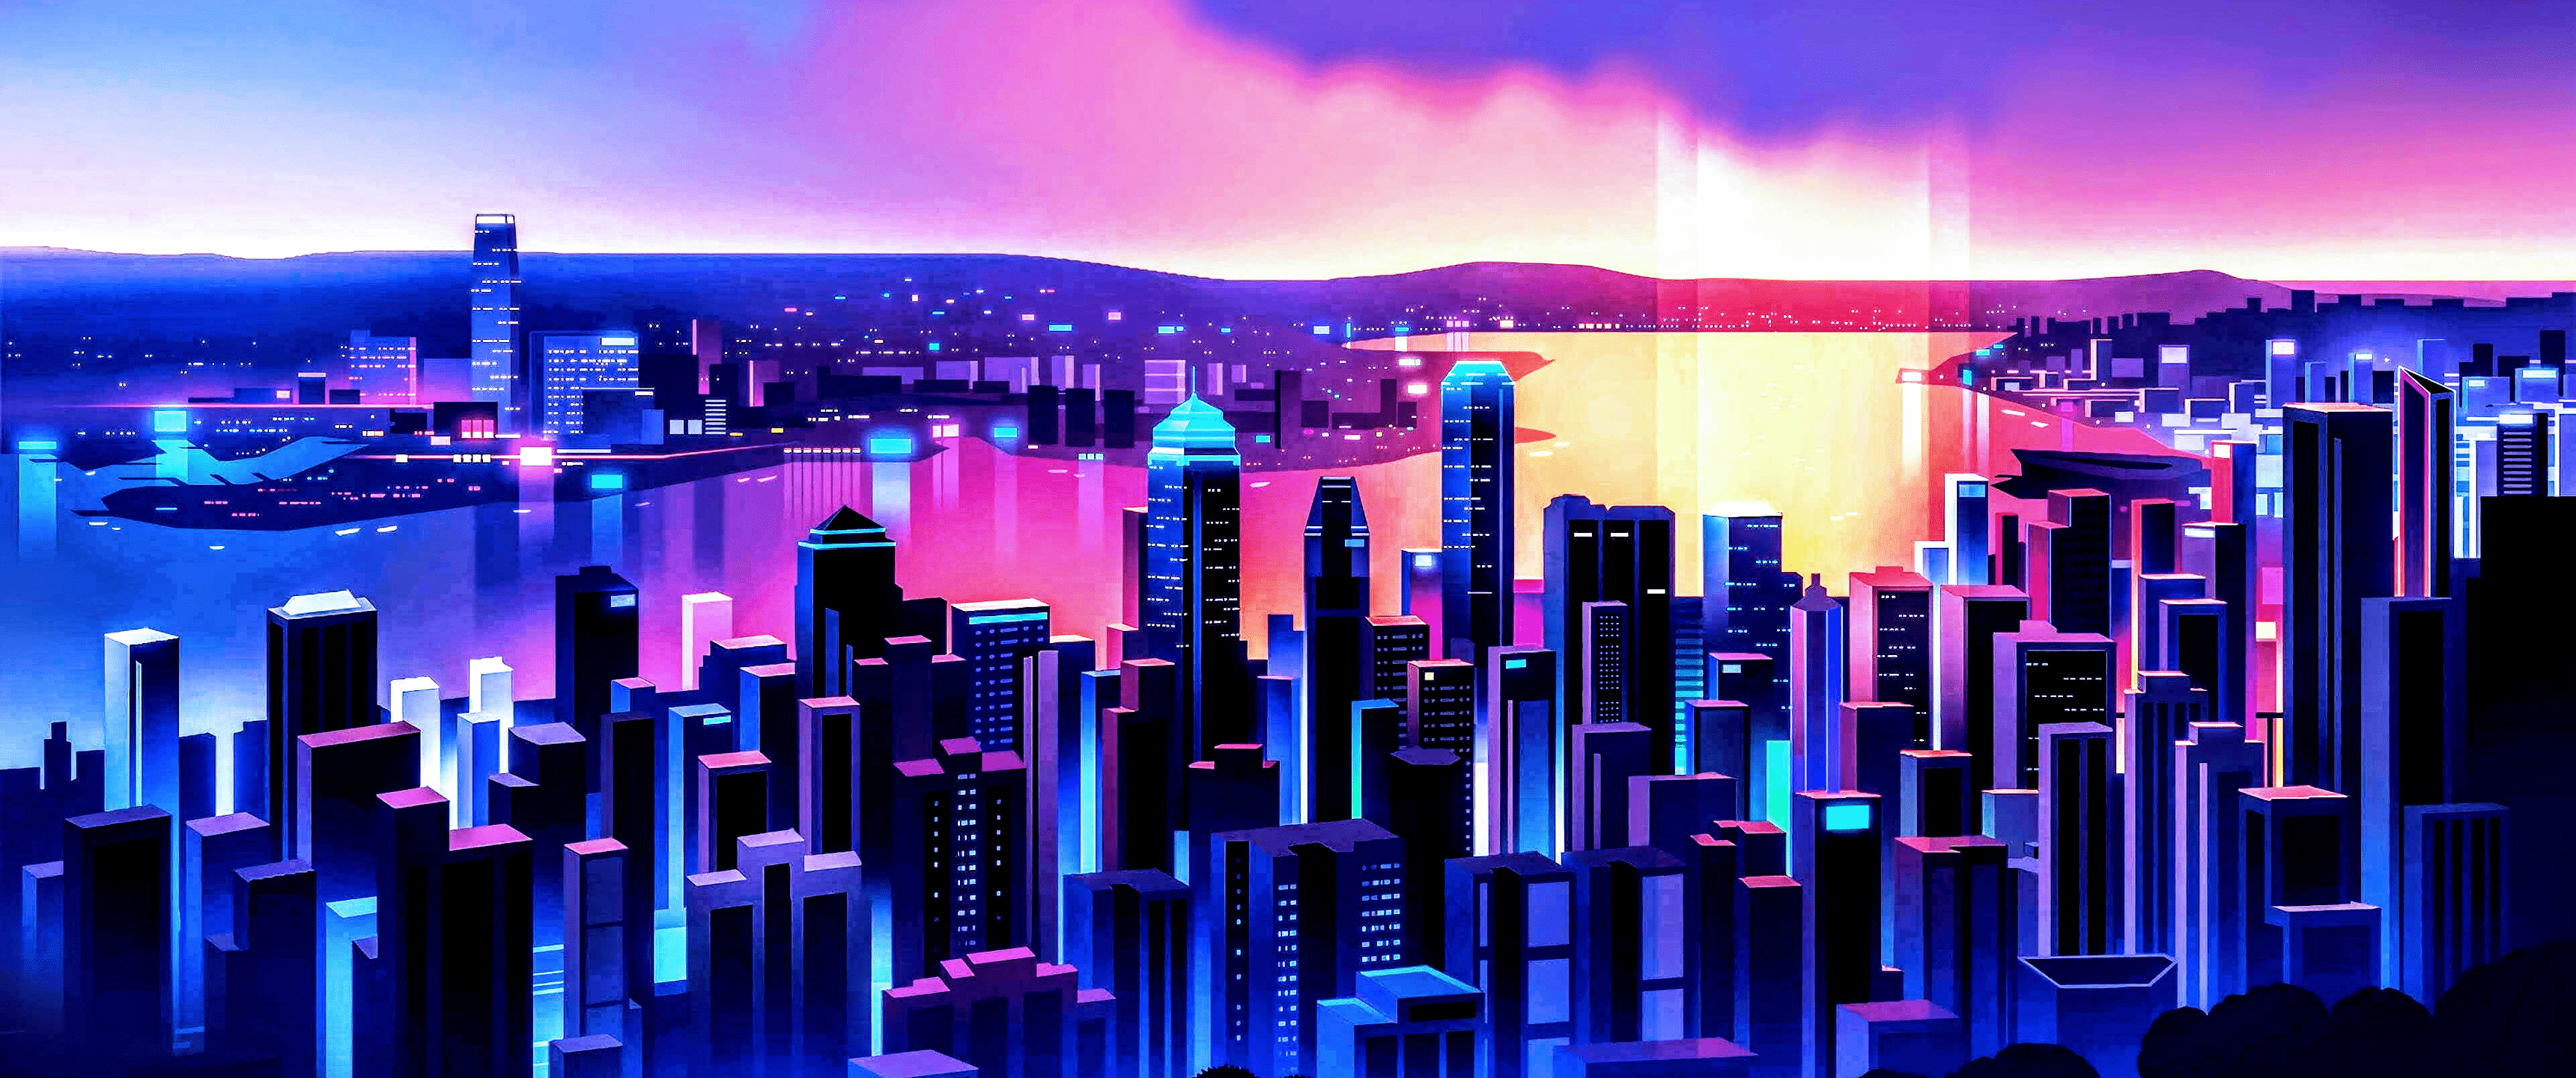 A city at night with colorful buildings and water - 3440x1440